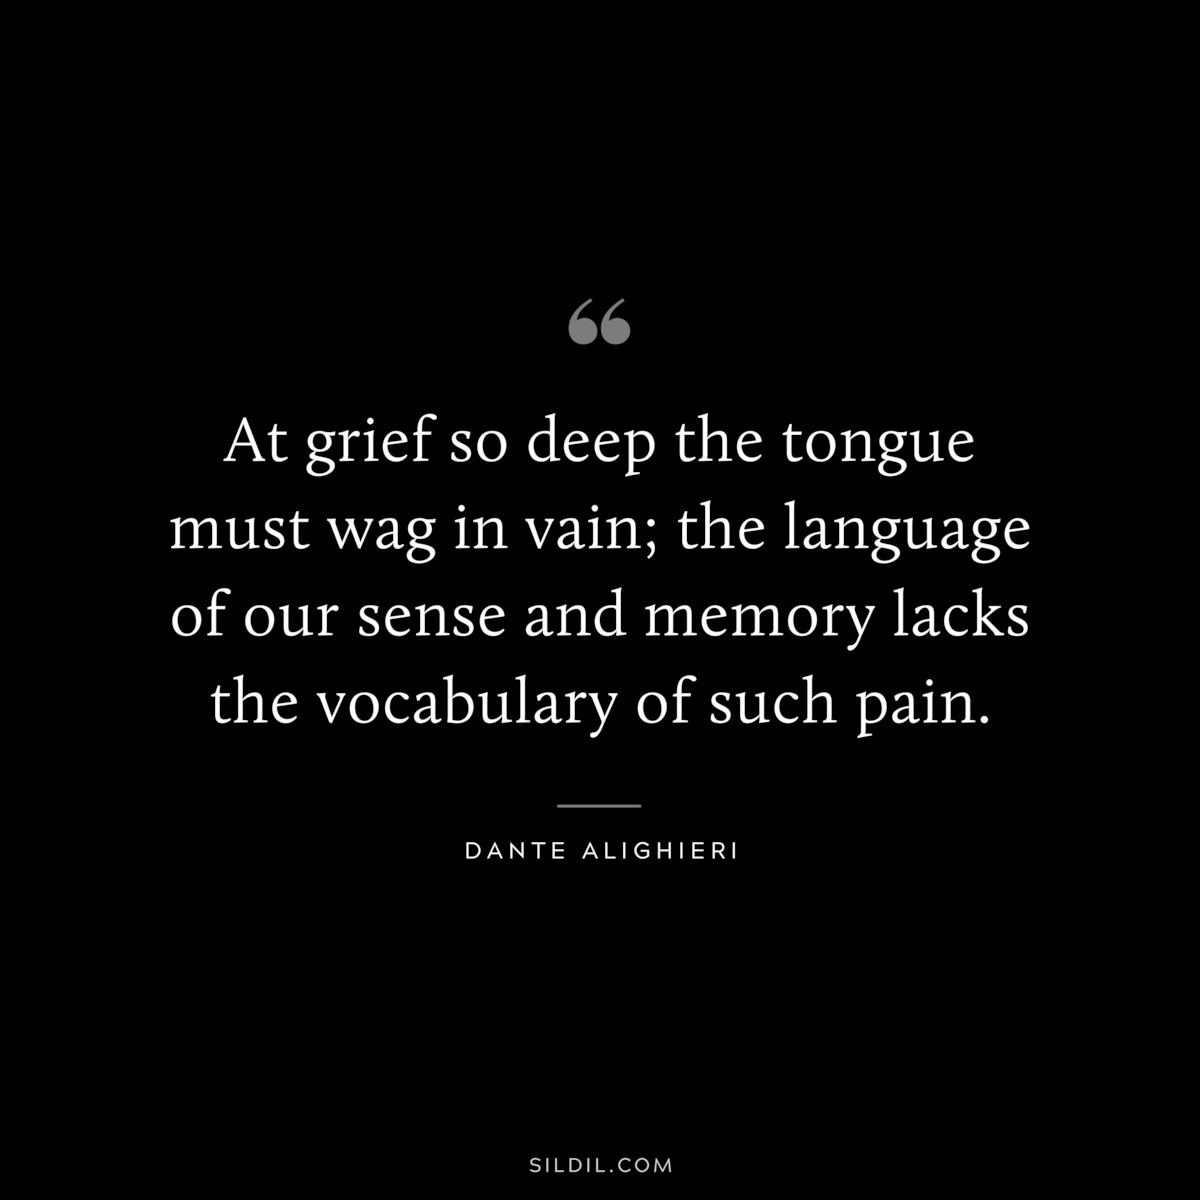 At grief so deep the tongue must wag in vain; the language of our sense and memory lacks the vocabulary of such pain. ― Dante Alighieri